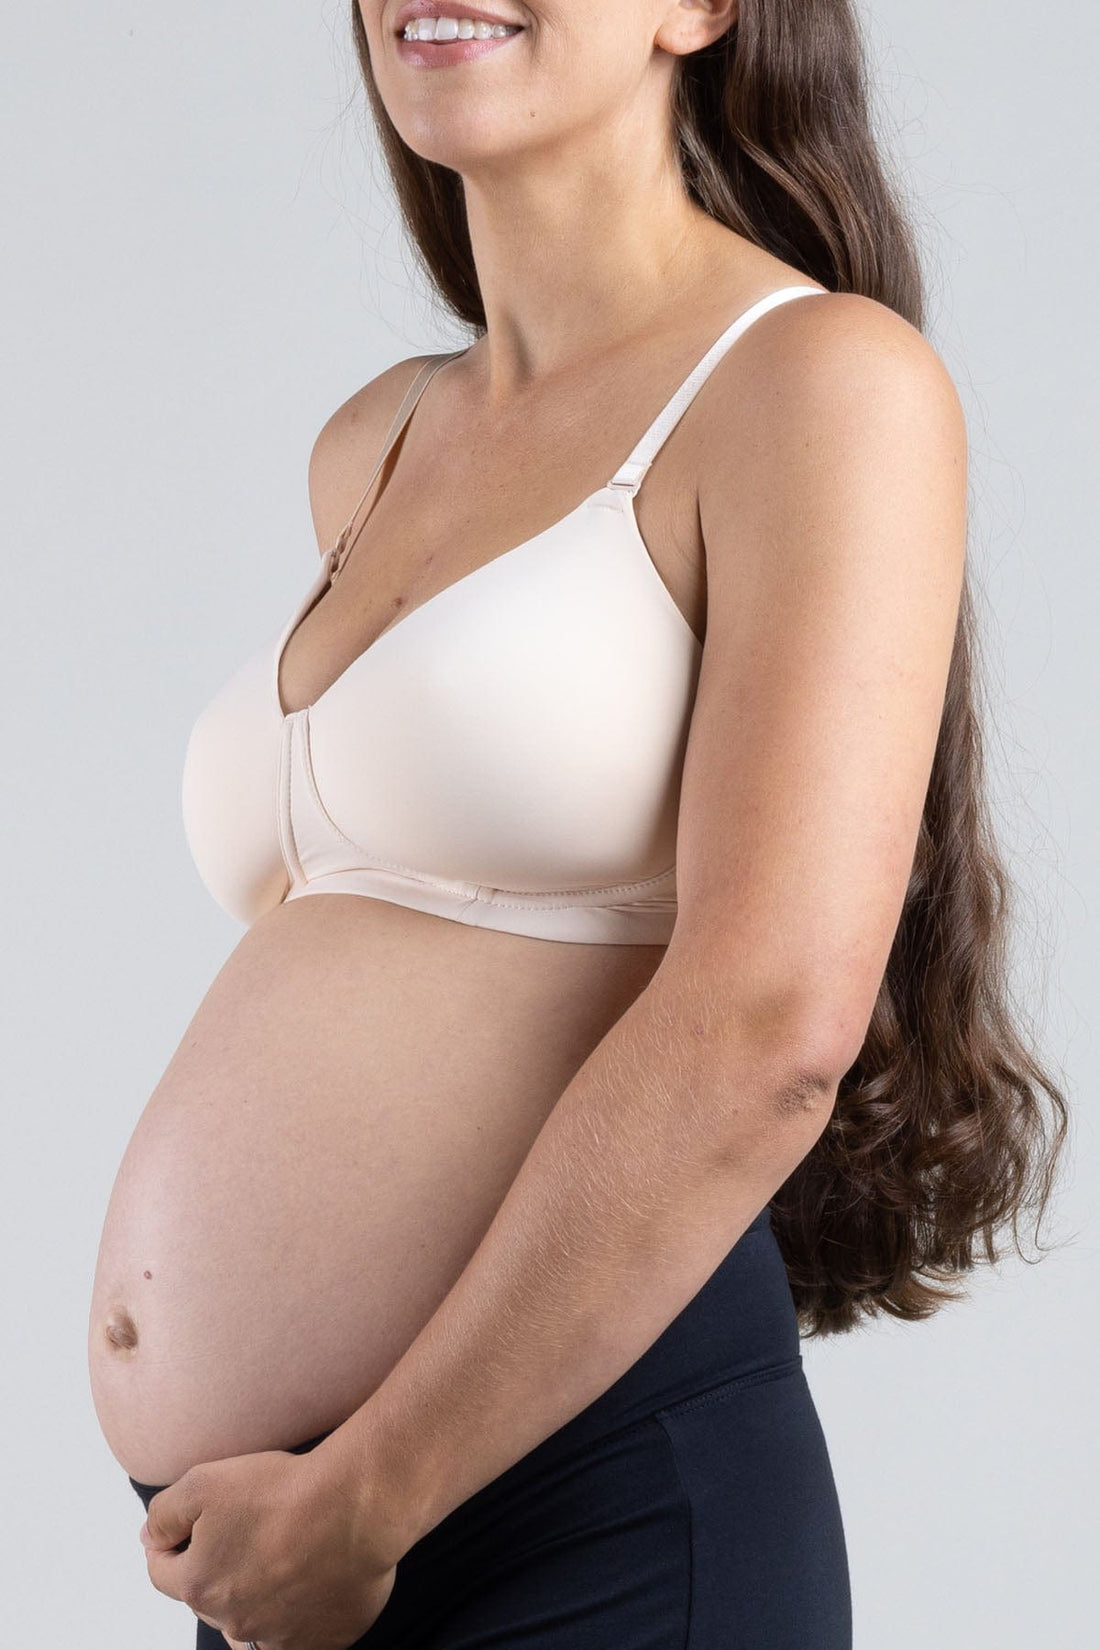 We carry nursing bras in our Prince George shop! Find us online or in